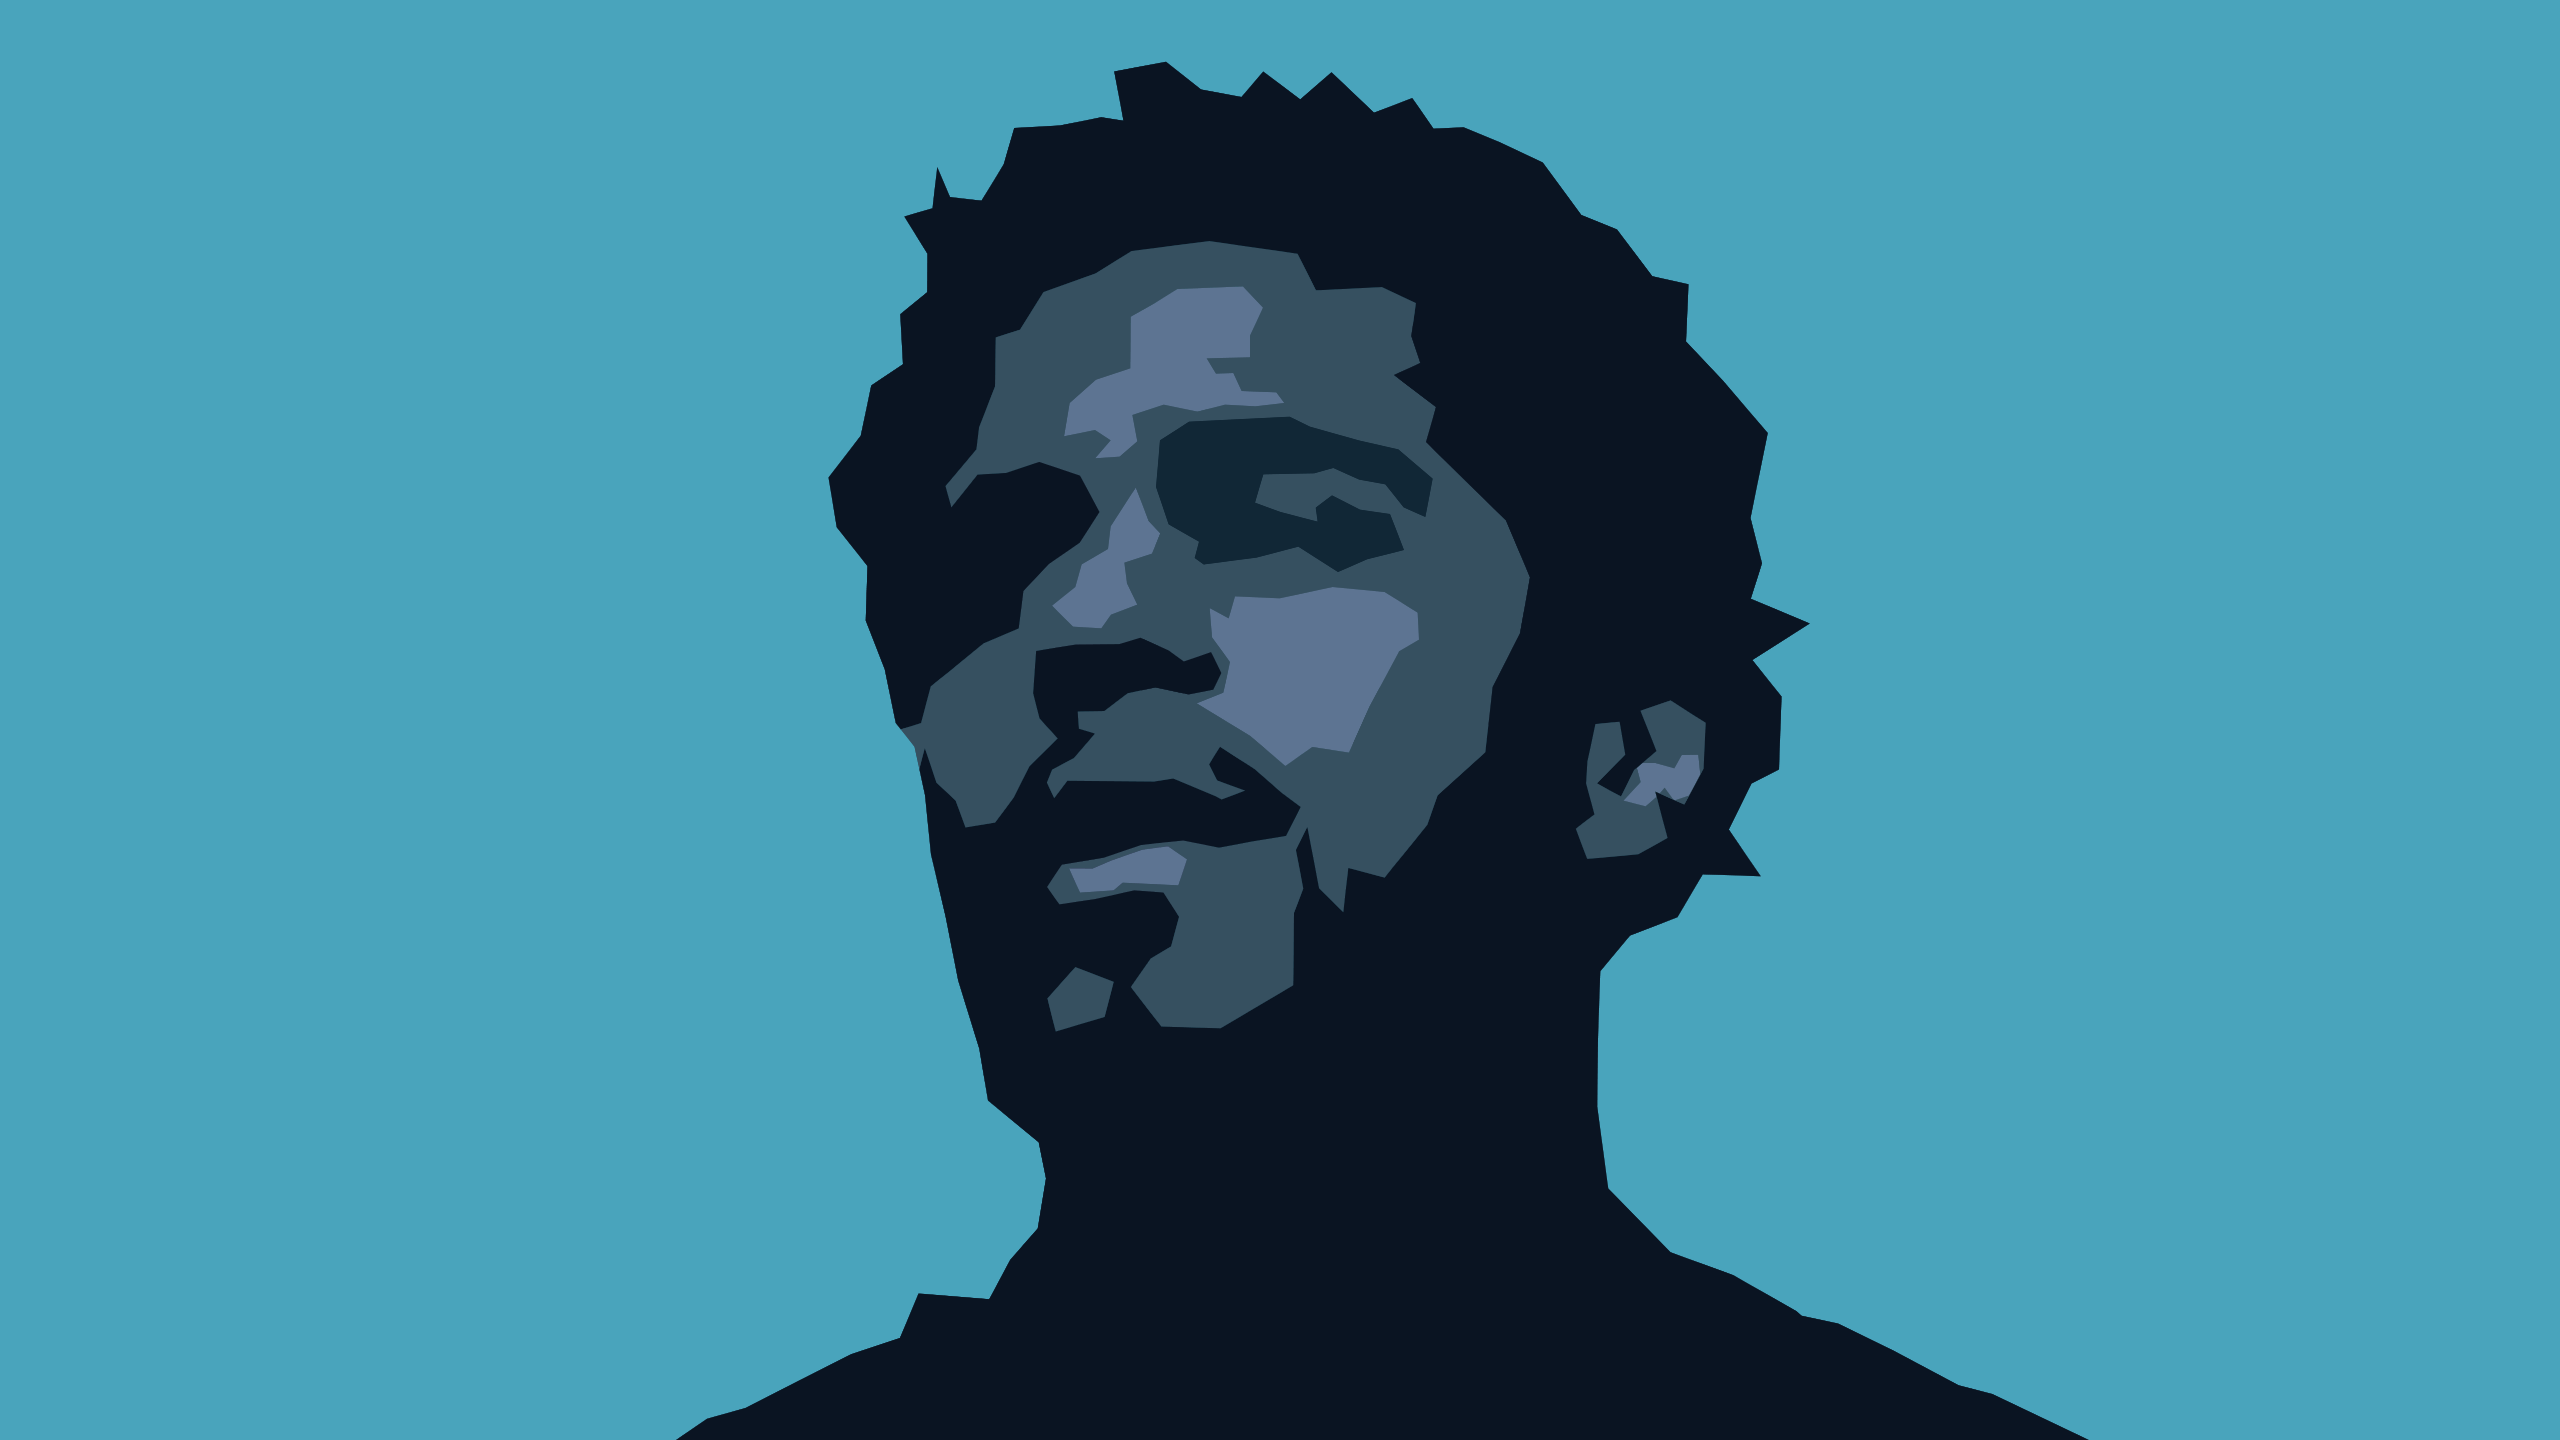 I Made a 1440p Wallpaper out of the Thumbnail for J. Cole